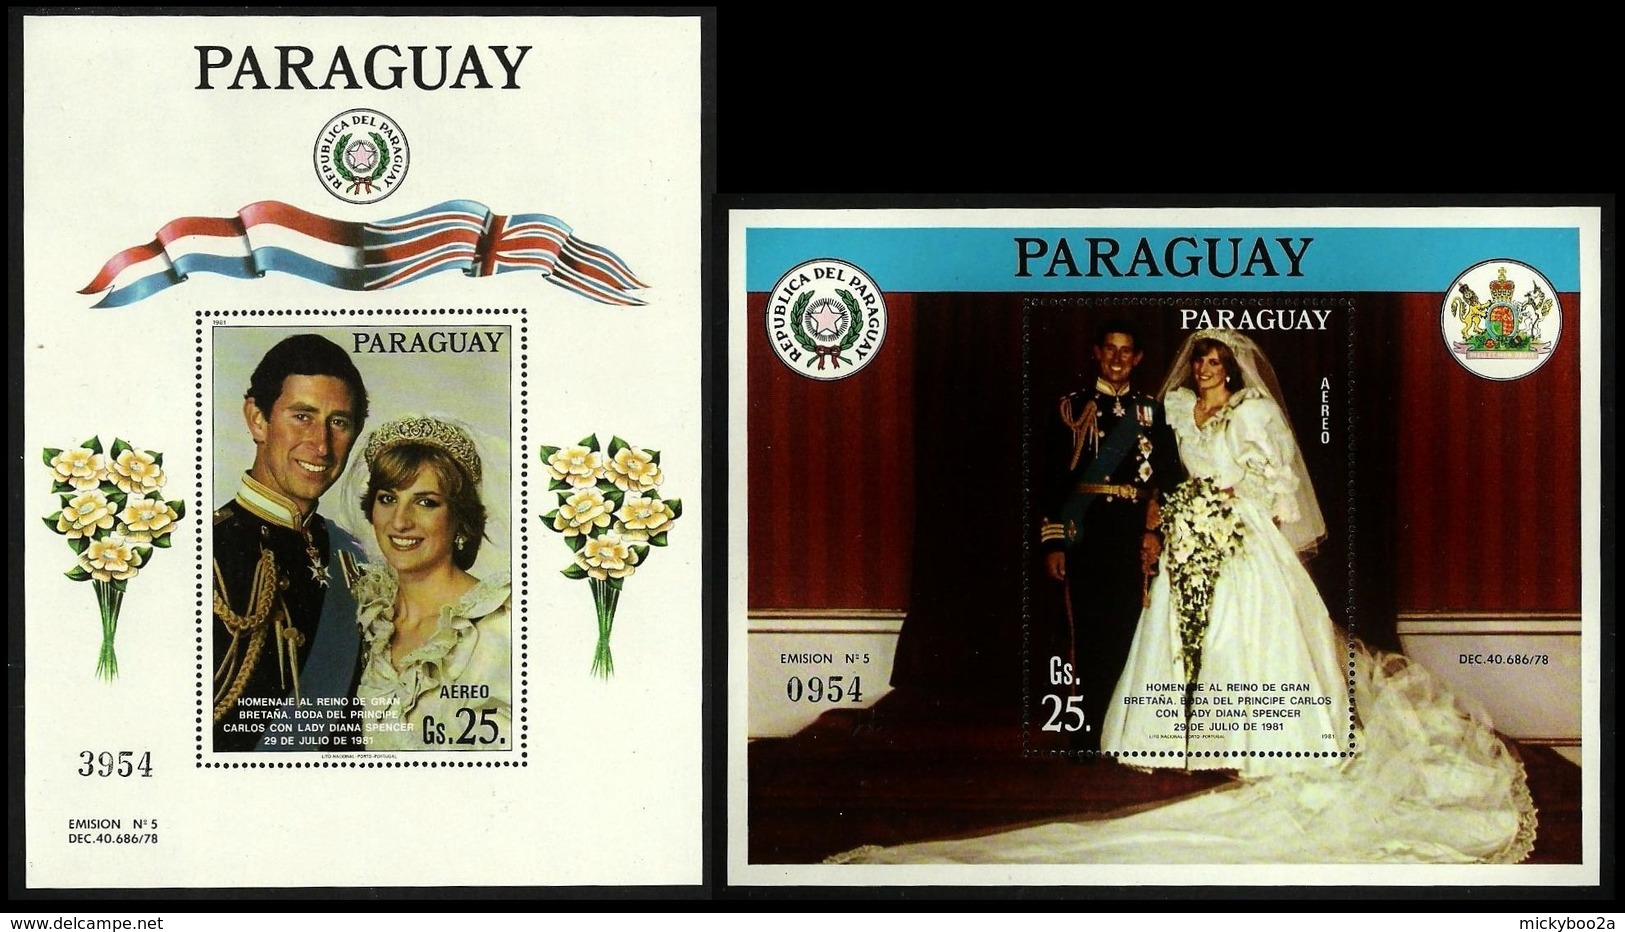 PARAGUAY 1981 ROYALTY ROYAL WEDDING DIANA OMNIBUS FLOWERS ORCHIDS MNH - Paraguay